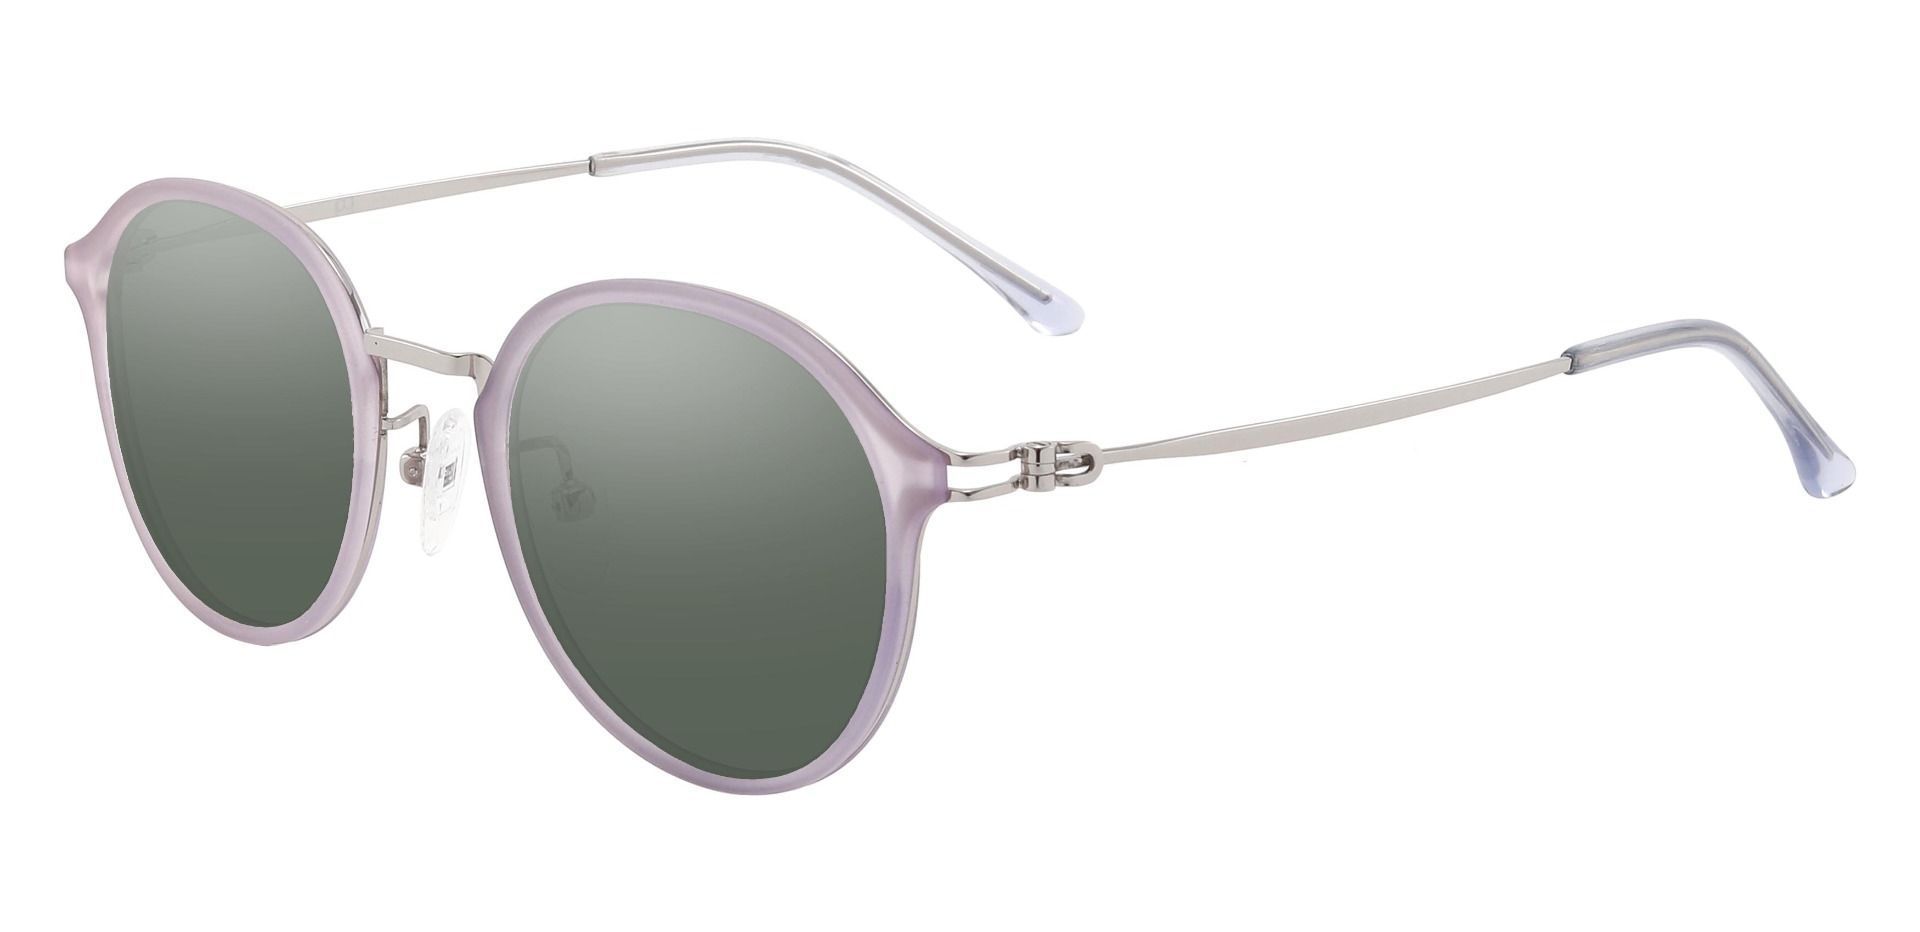 Billings Round Non-Rx Sunglasses - Purple Frame With Green Lenses